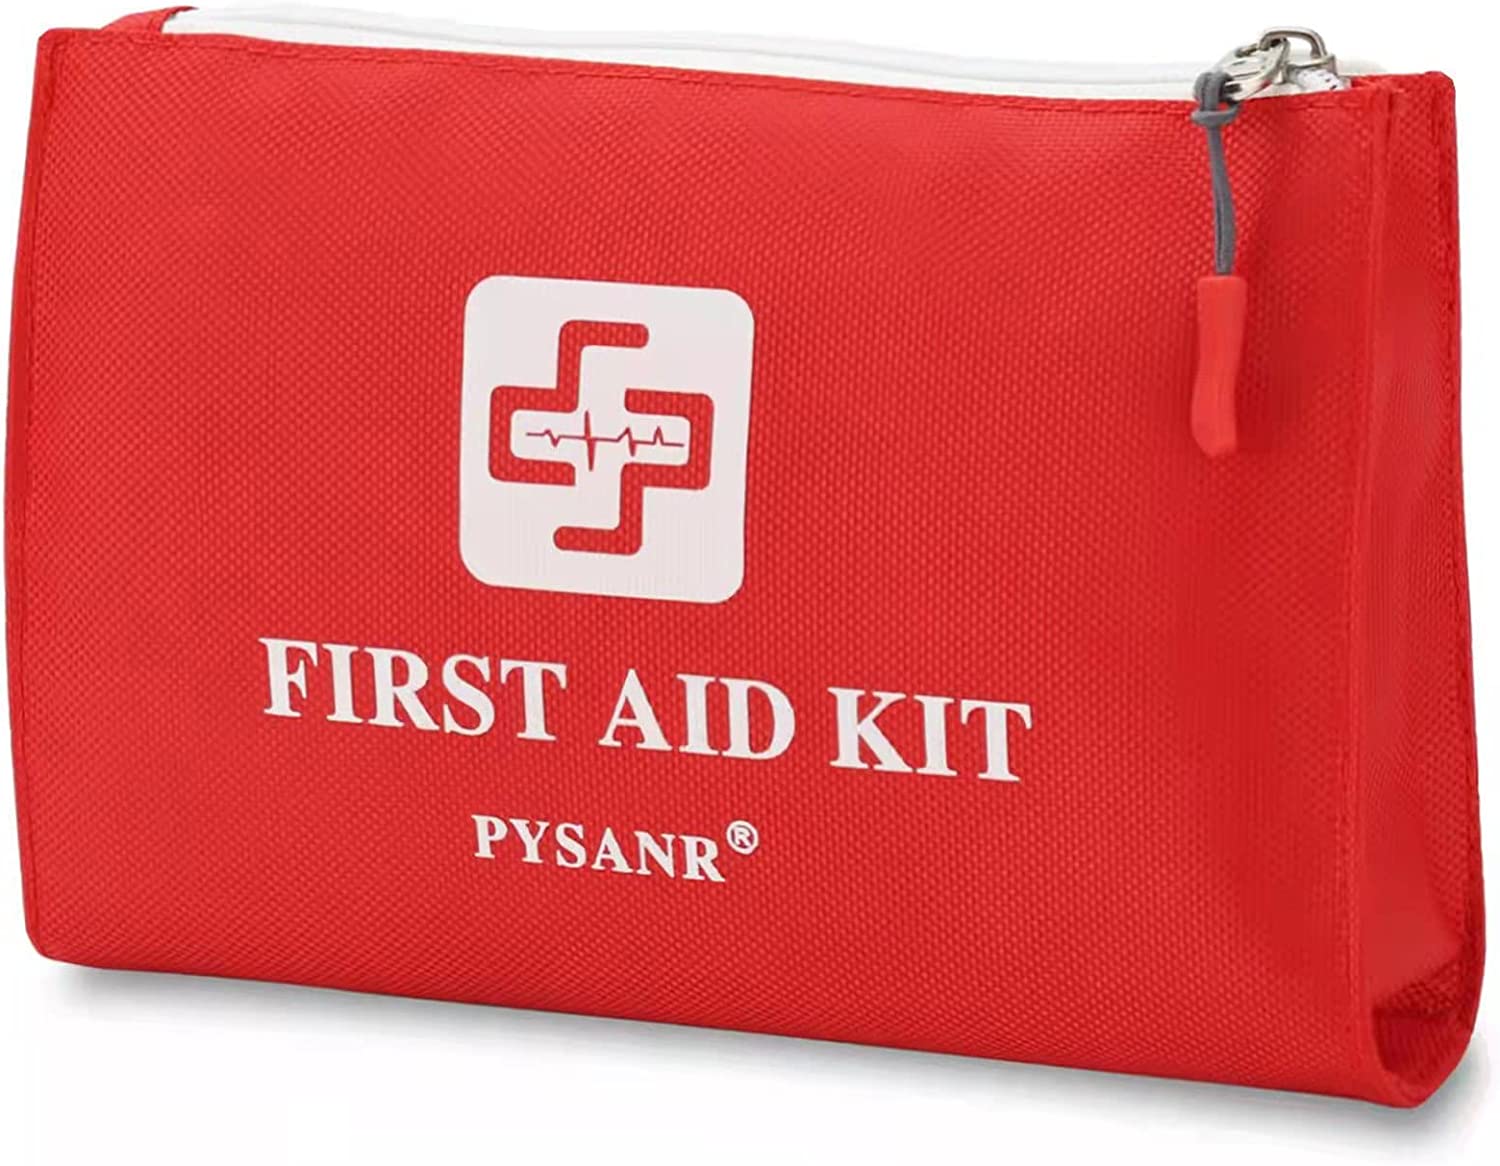 First Aid Kit, PYSANR 150 Piece Small First Aid Kits with Foil Blanket, Scissors First Aid Bag for Emergency, Home, Camping, Travel, Sports, Office, Outdoor, Car, School